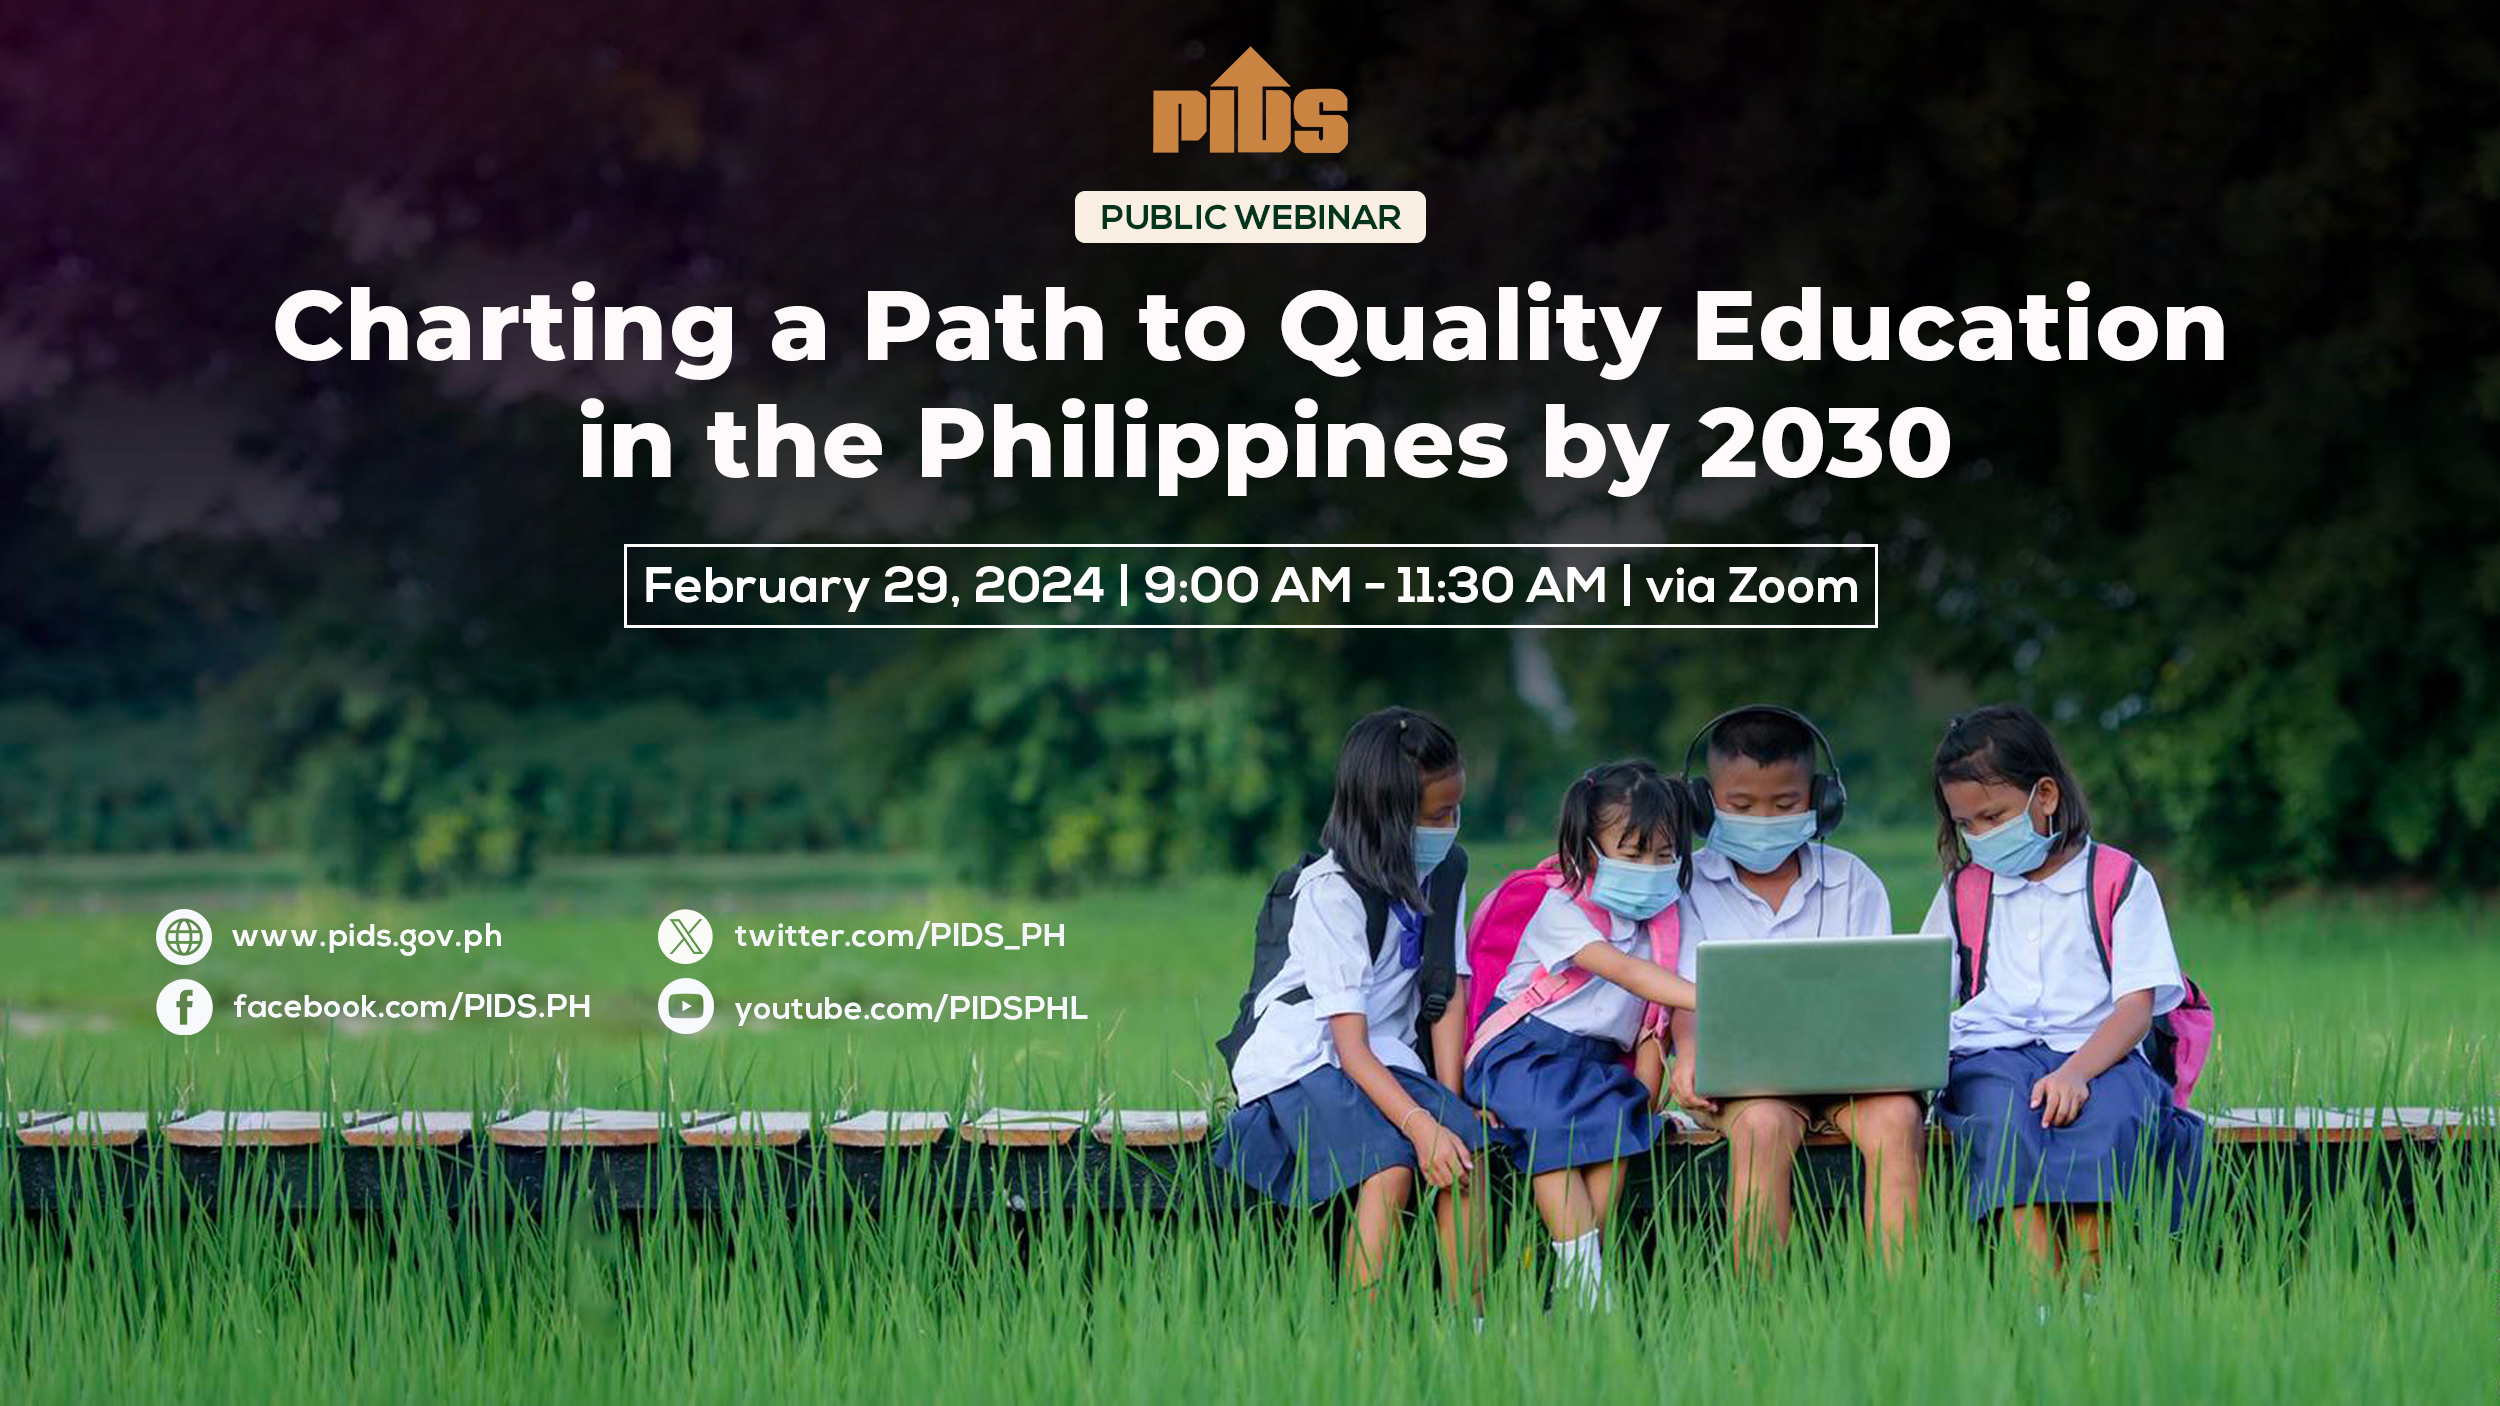 primary health care in the philippines essay